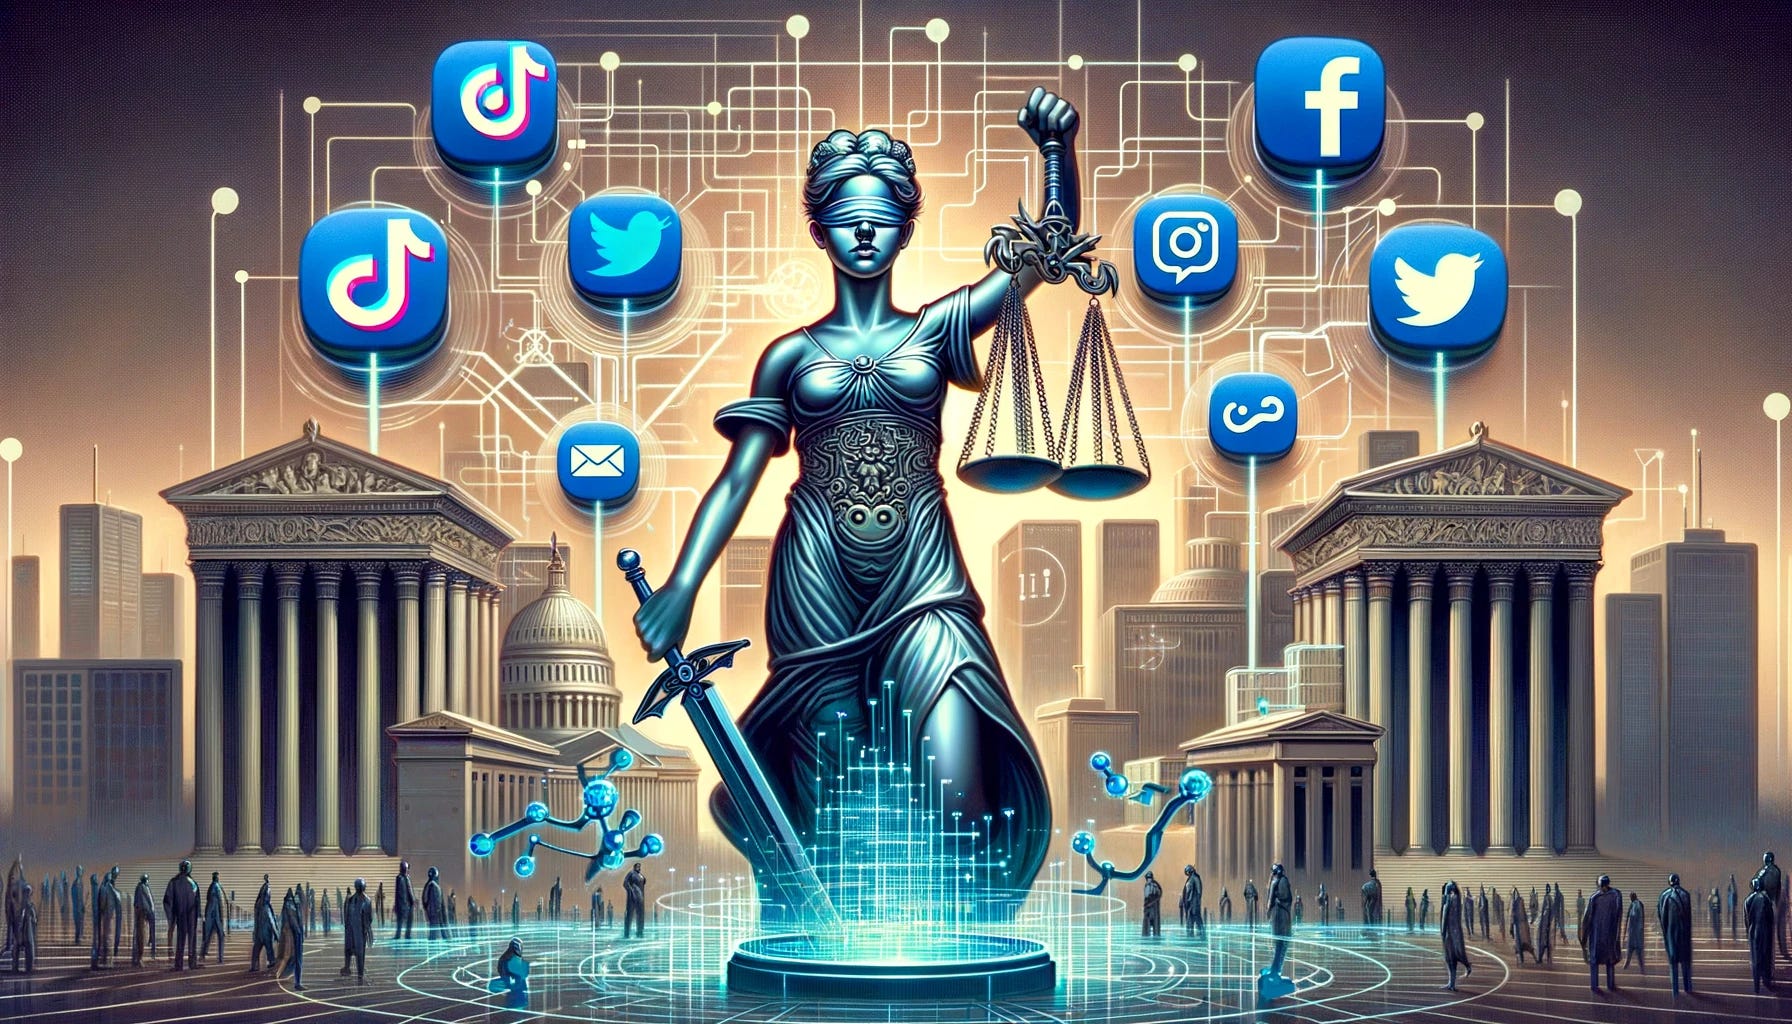 Scales of Justice weigh ALL social Platforms including TikTok and Facebook